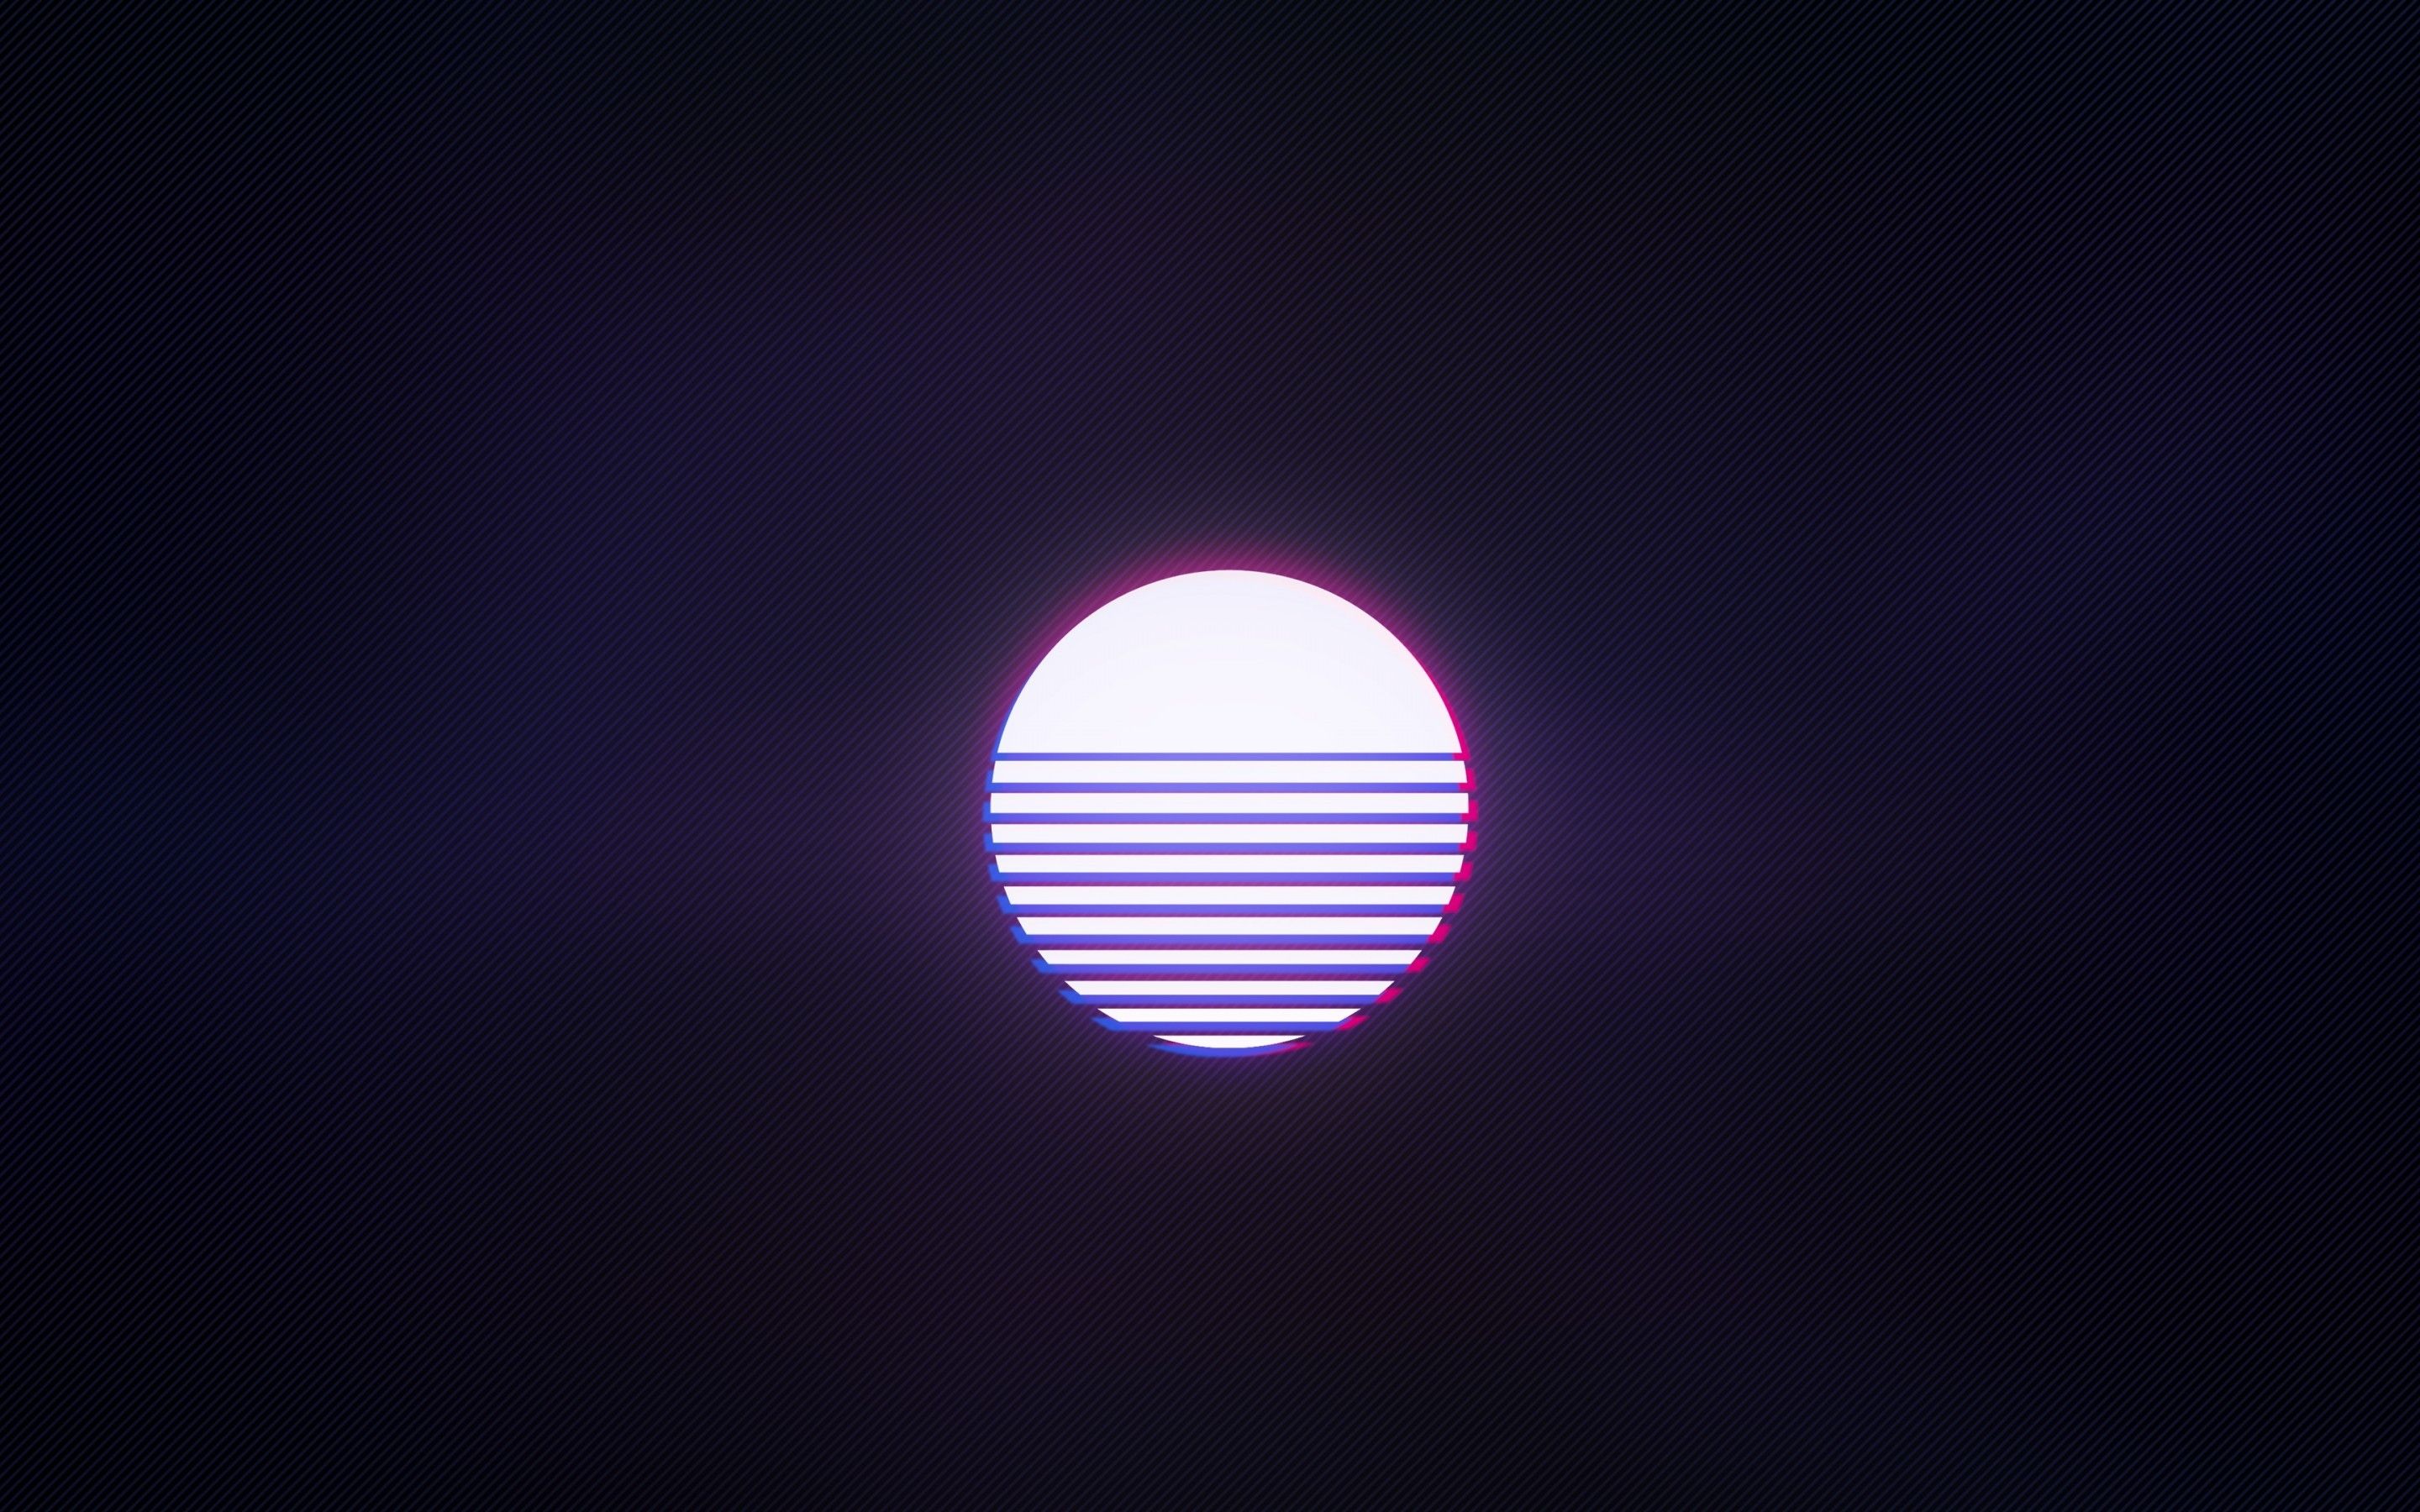 Download 2880x1800 Sun, Retro Wave, Synthwave, Music Wallpaper for MacBook Pro 15 inch